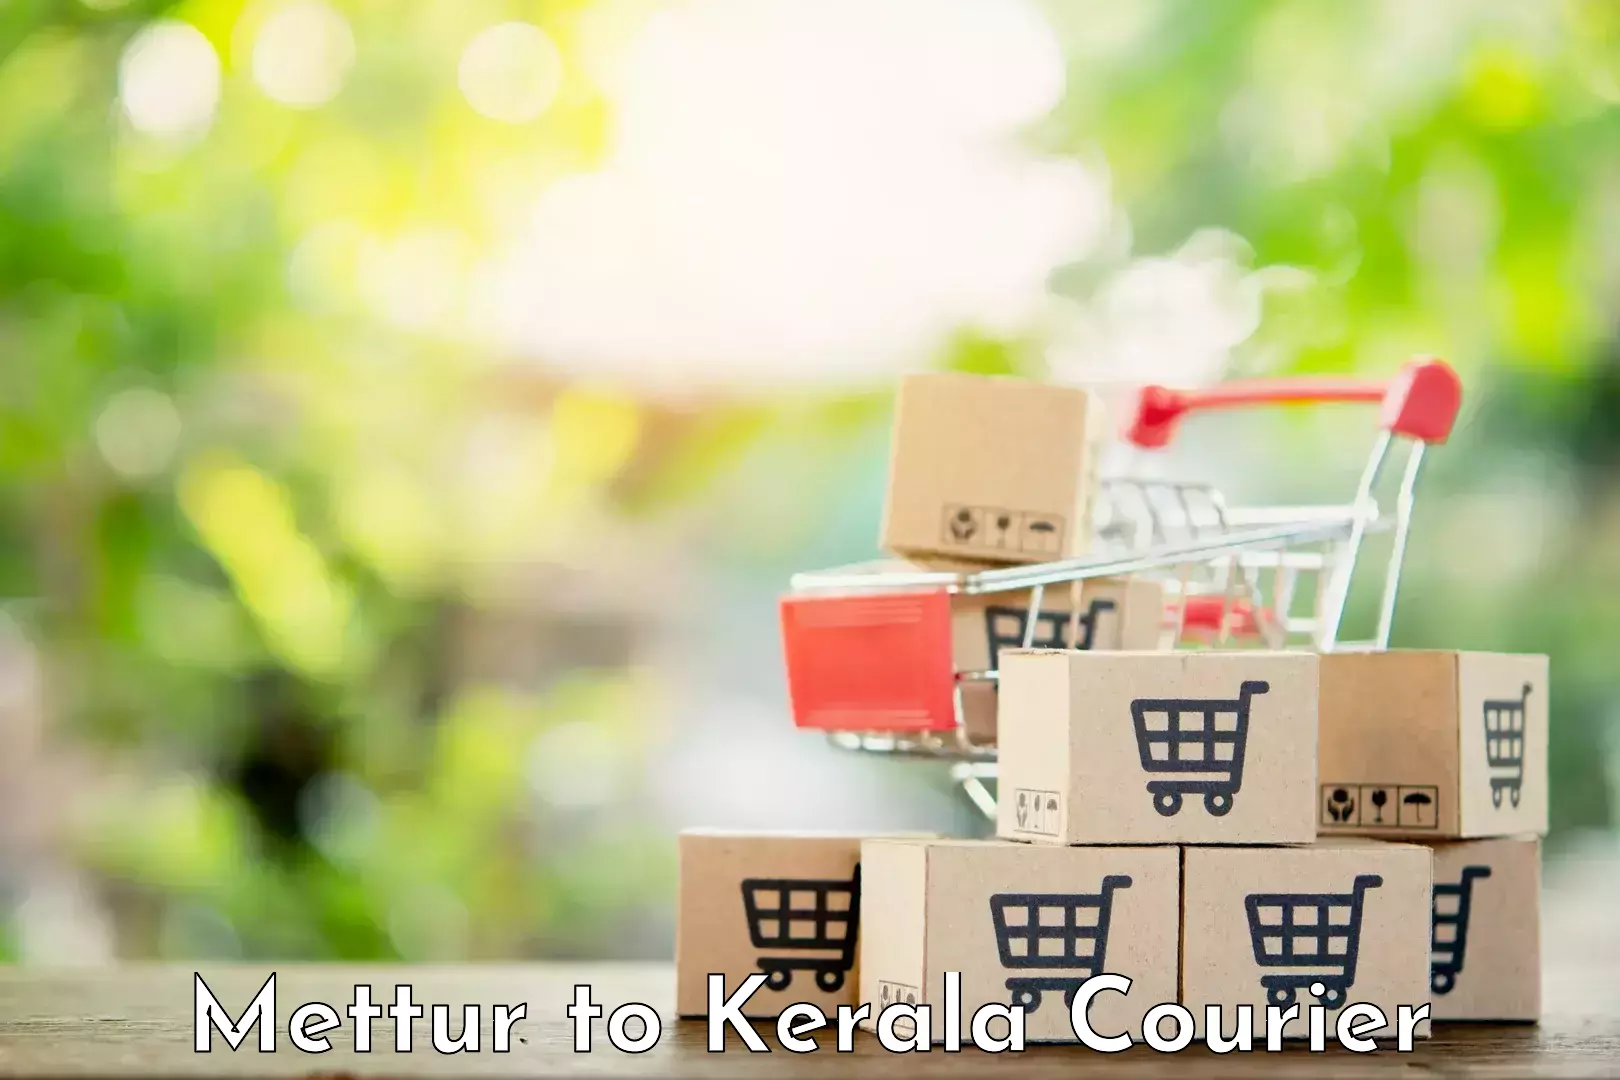 On-call courier service Mettur to Chalakudy